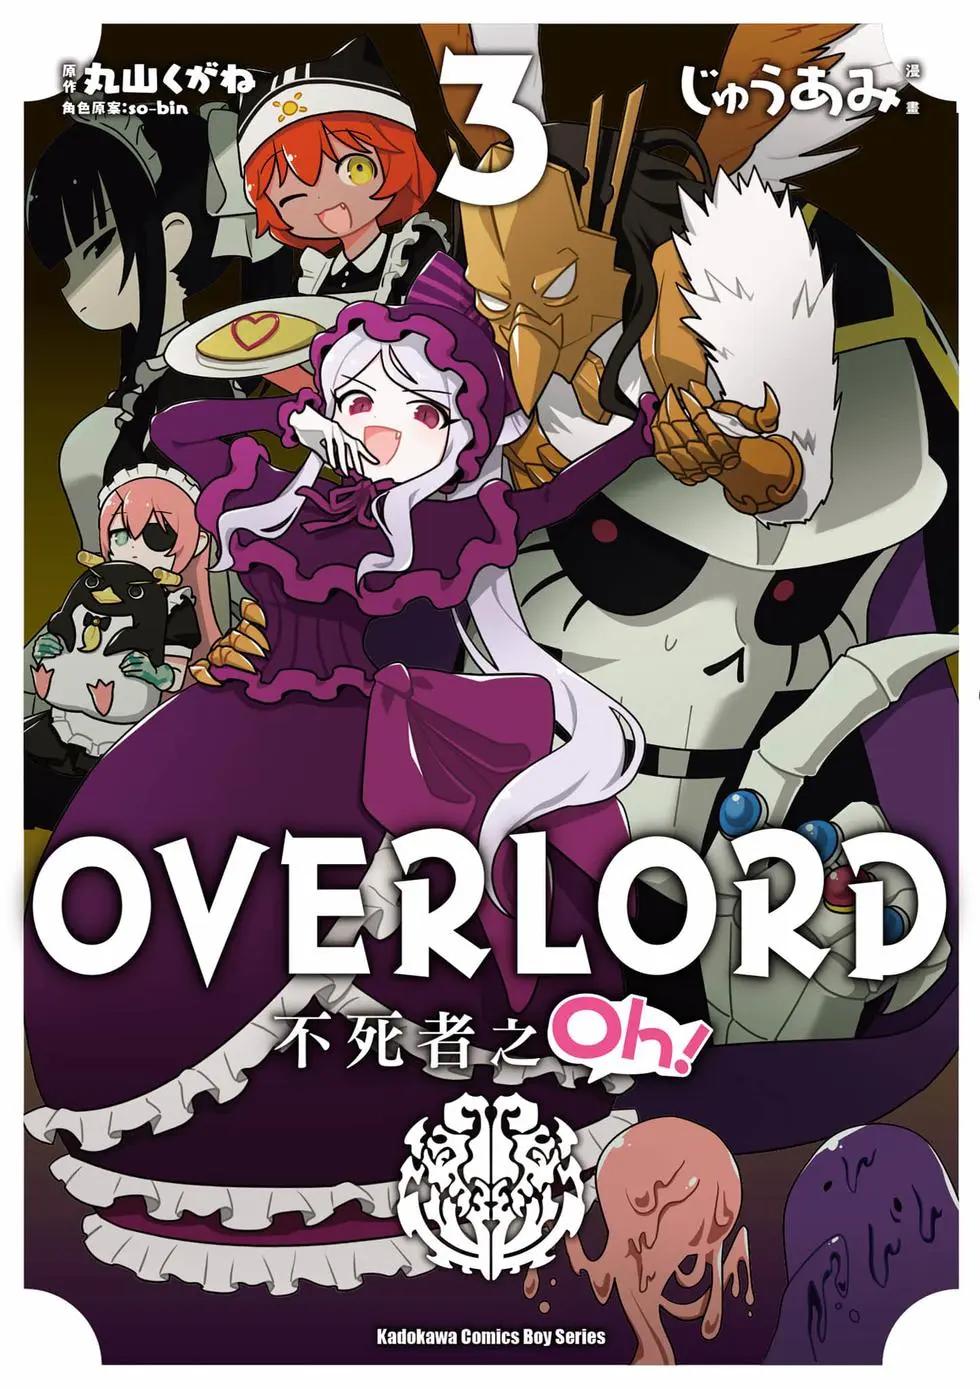 Overlord不死者之OH！ - 第03卷(1/3) - 1